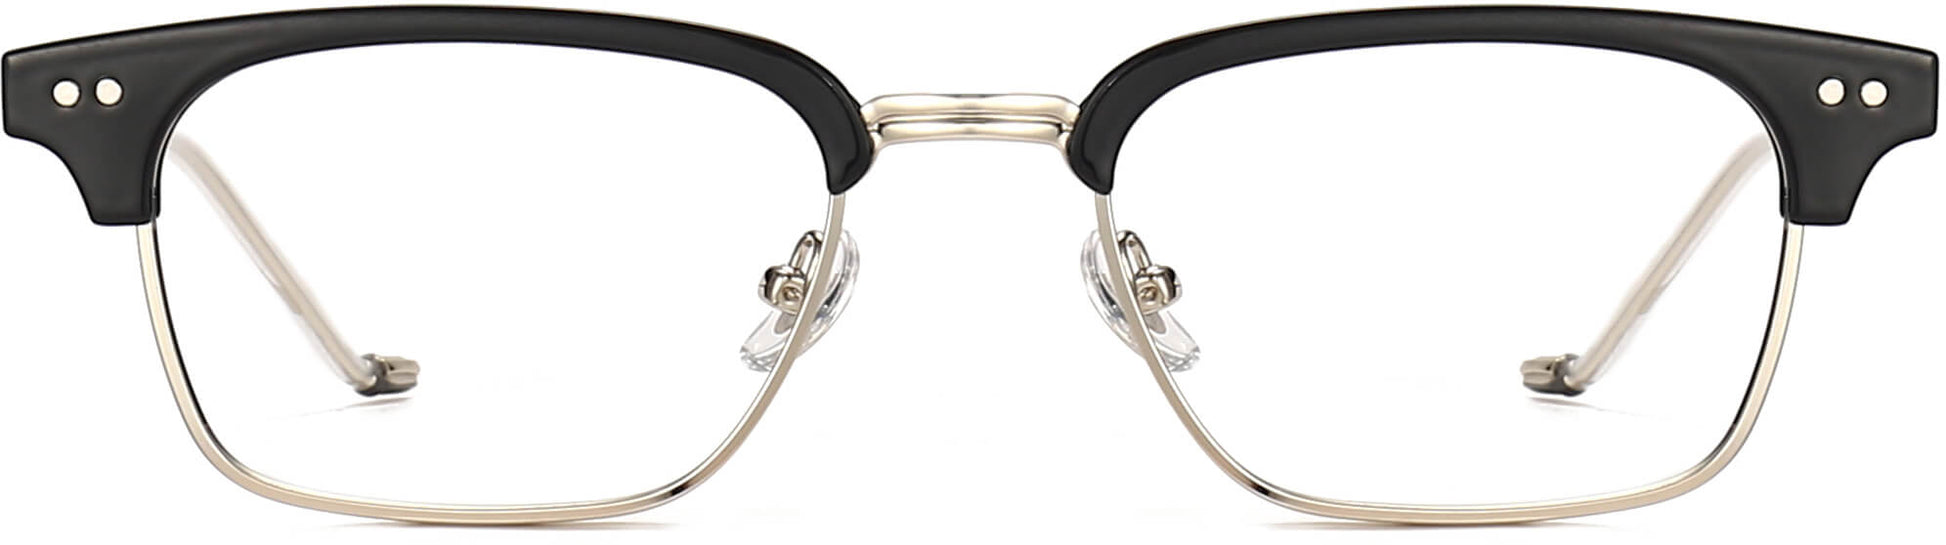 Zyaire Browline Black Eyeglasses from ANRRI, front view